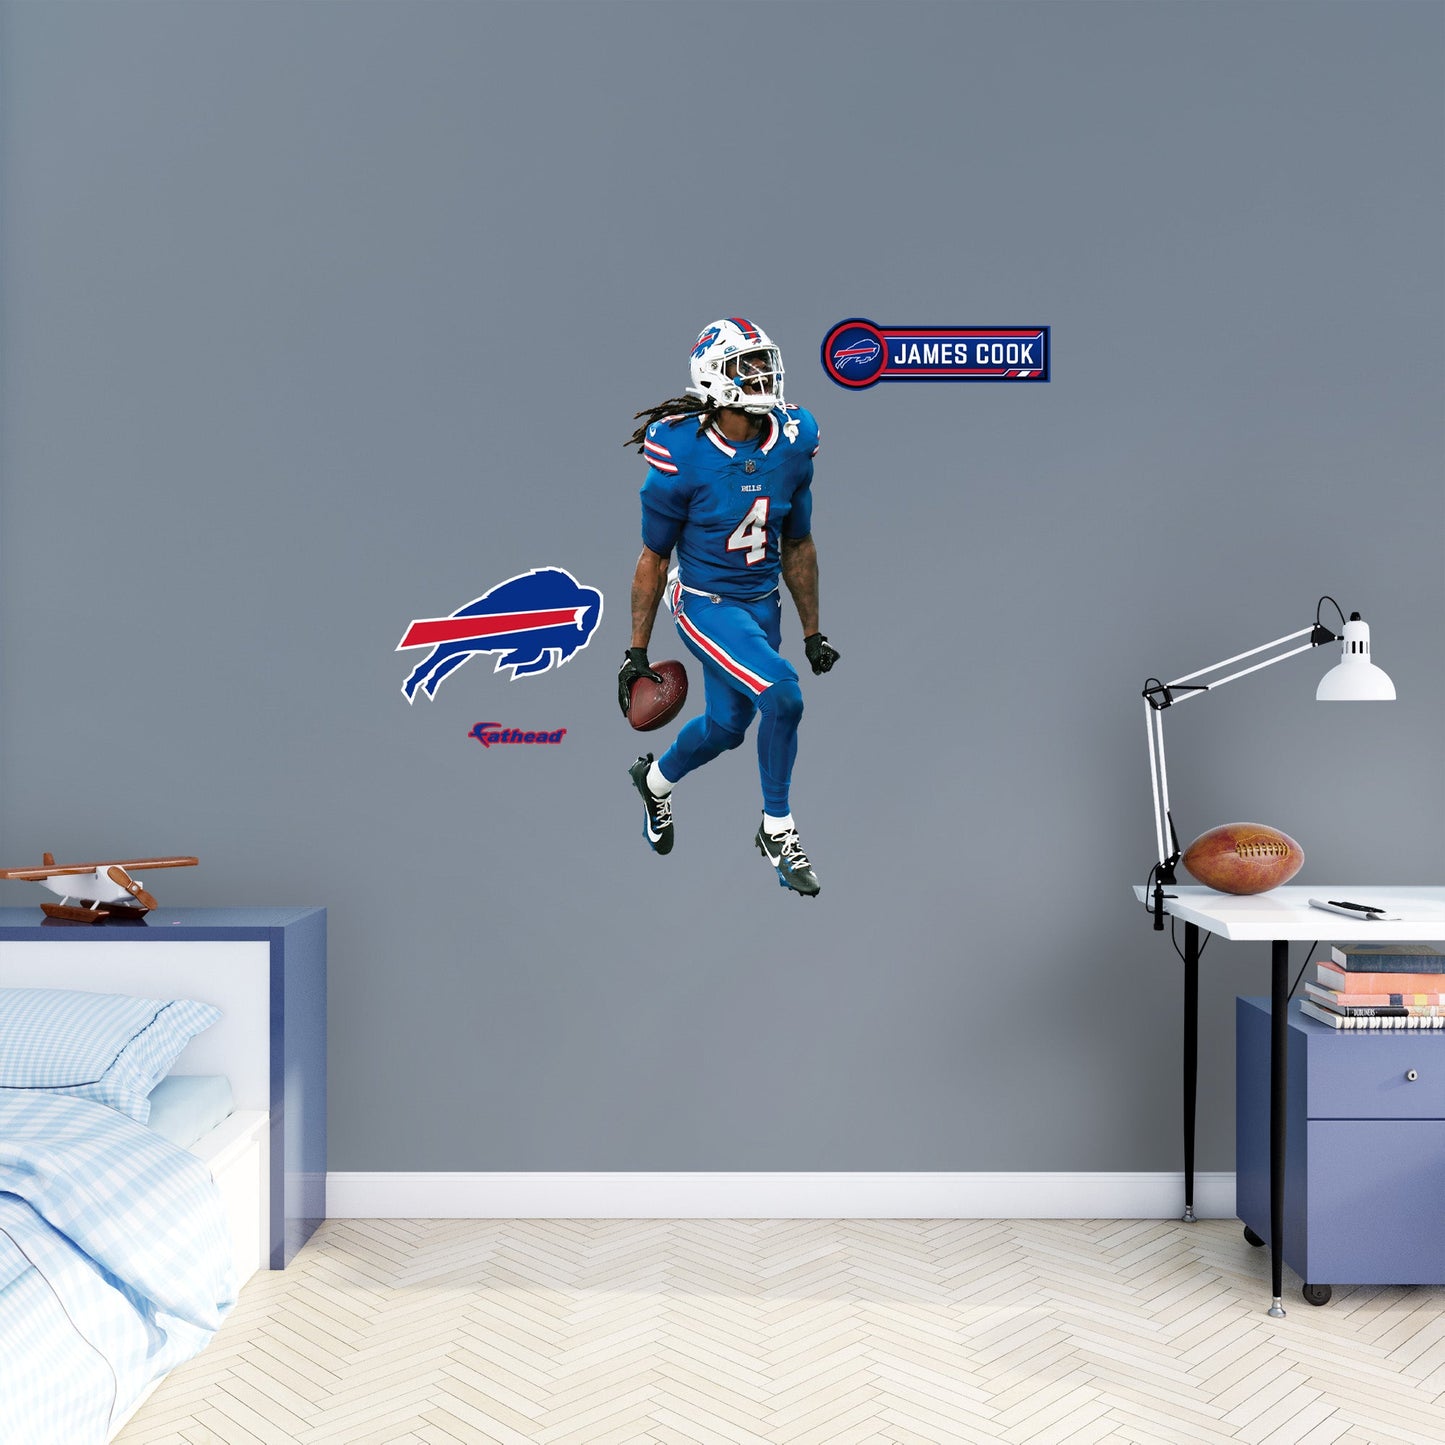 Buffalo Bills: James Cook Celebration        - Officially Licensed NFL Removable     Adhesive Decal